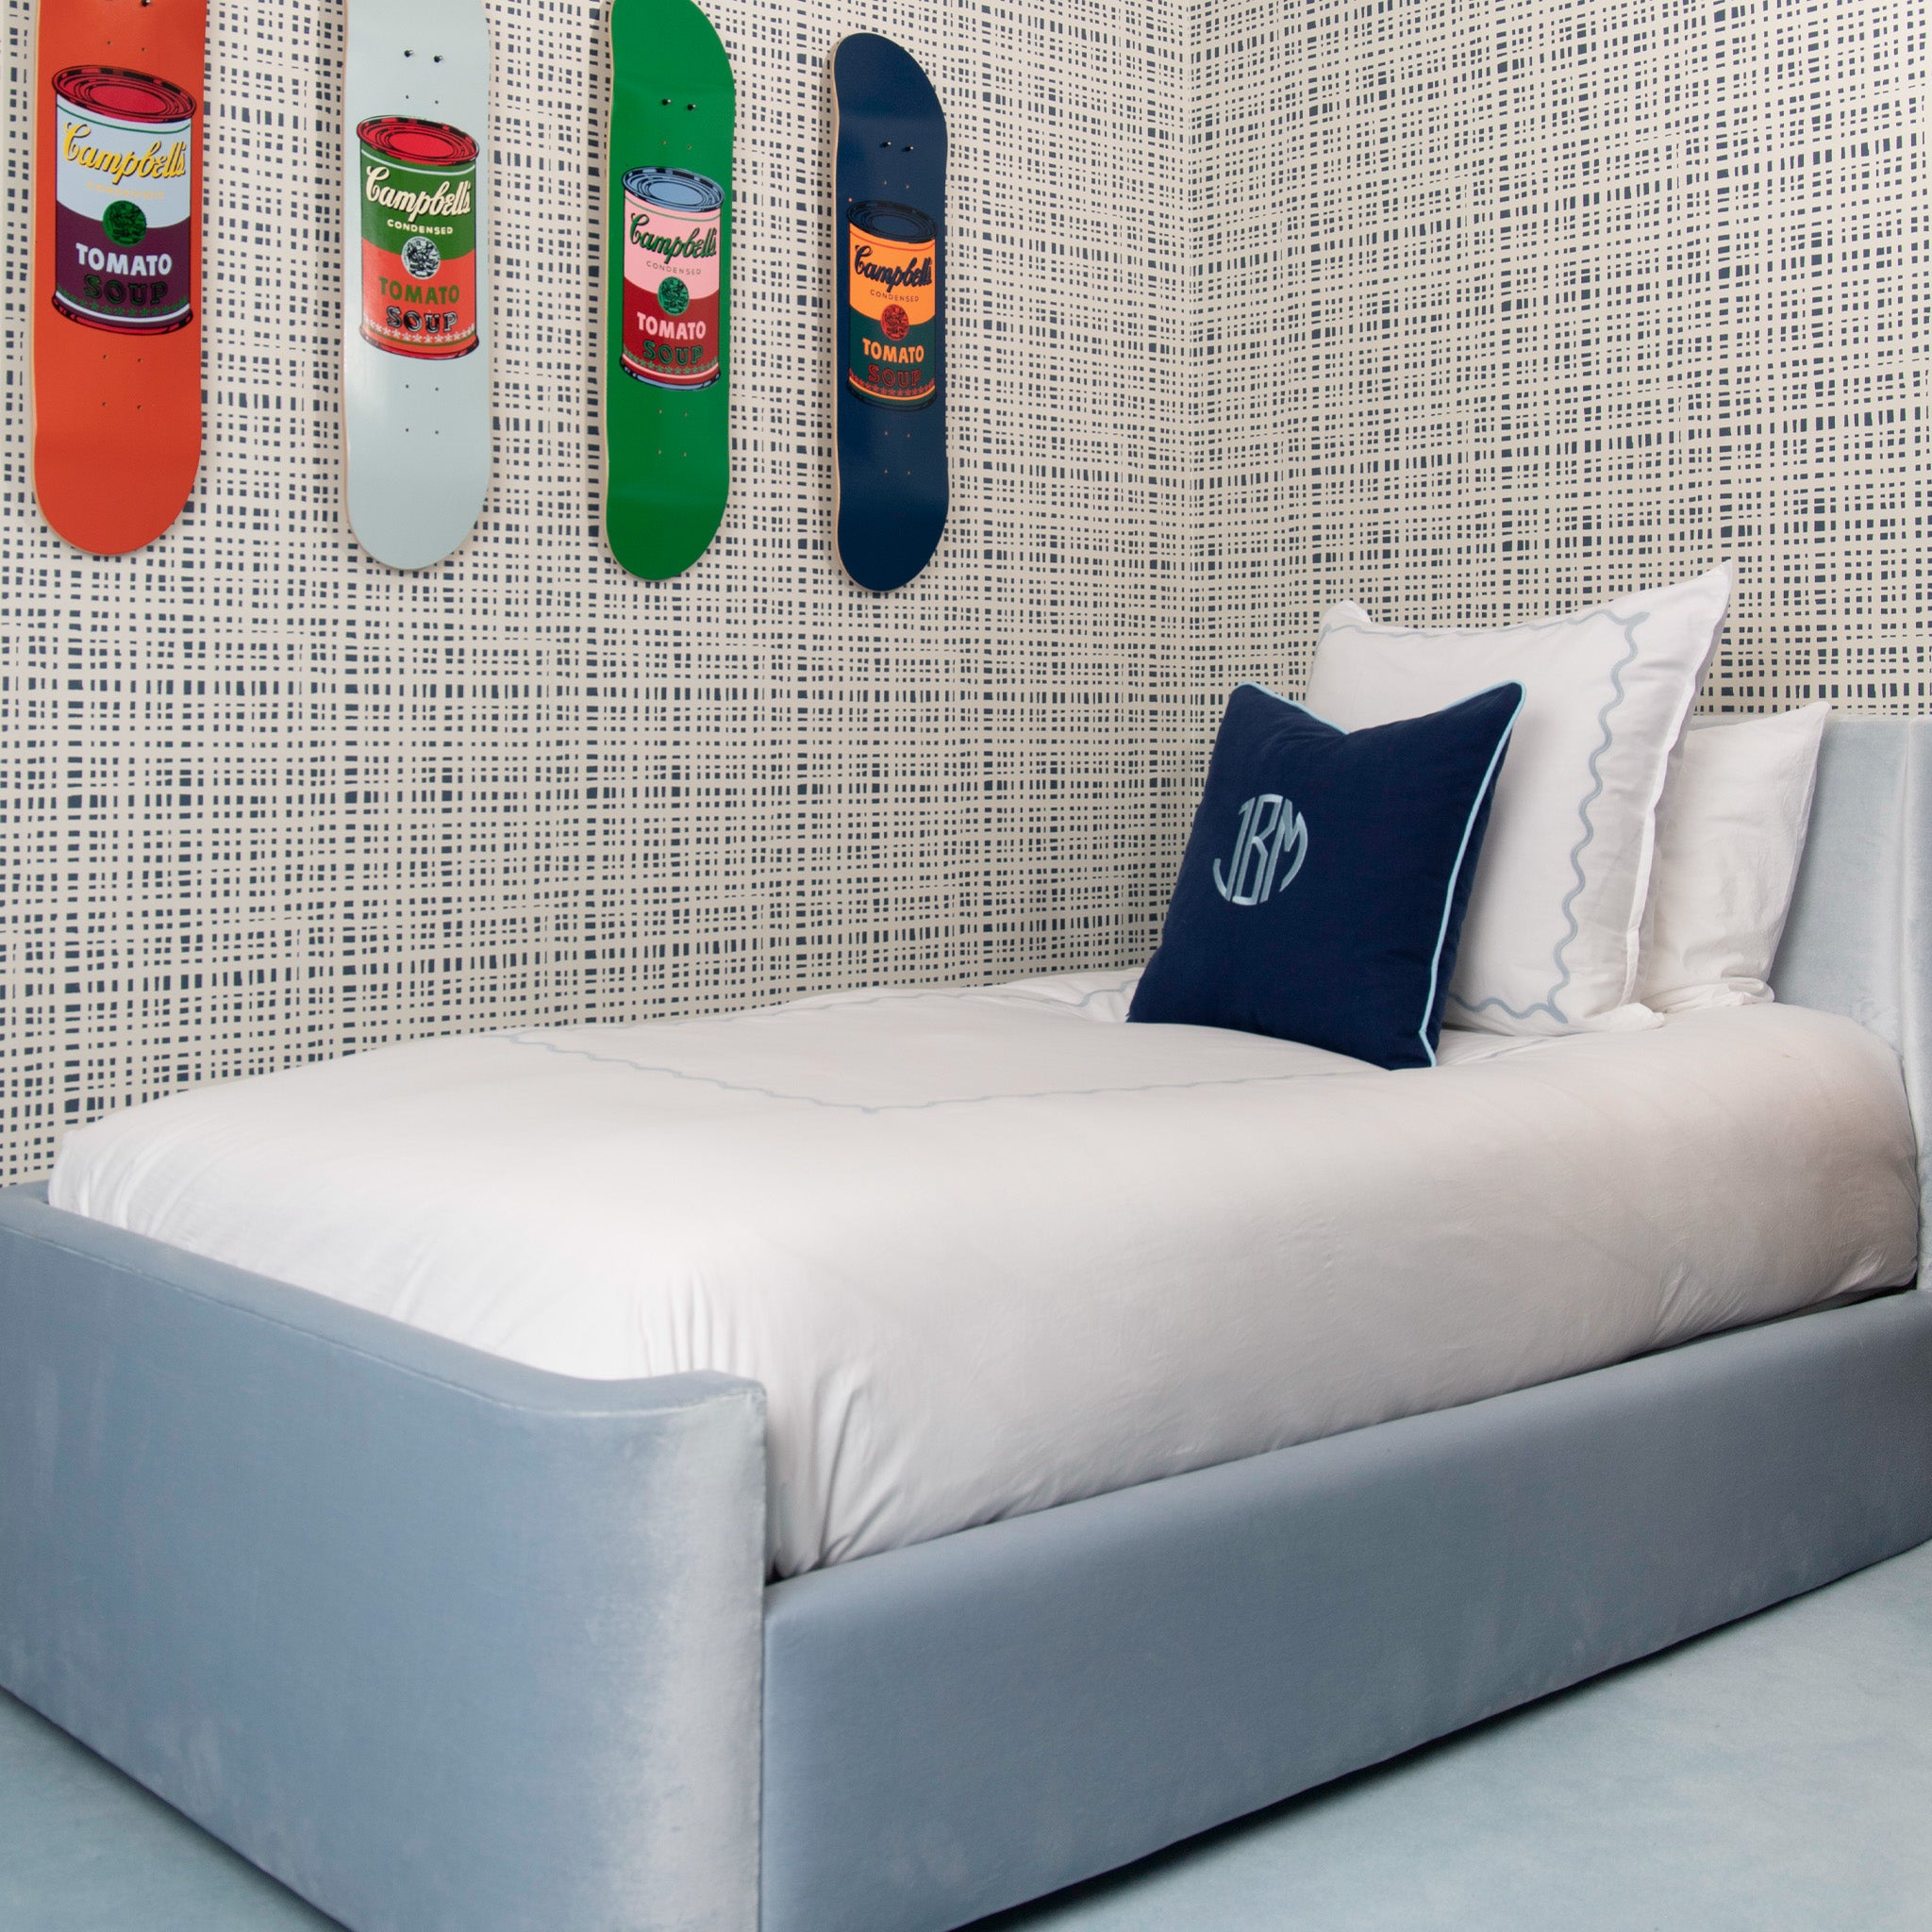 Boys bedroom styled with navy gingham printed wallpaper with four hanging skate boards by white bed with navy blue monogrammed pillow 